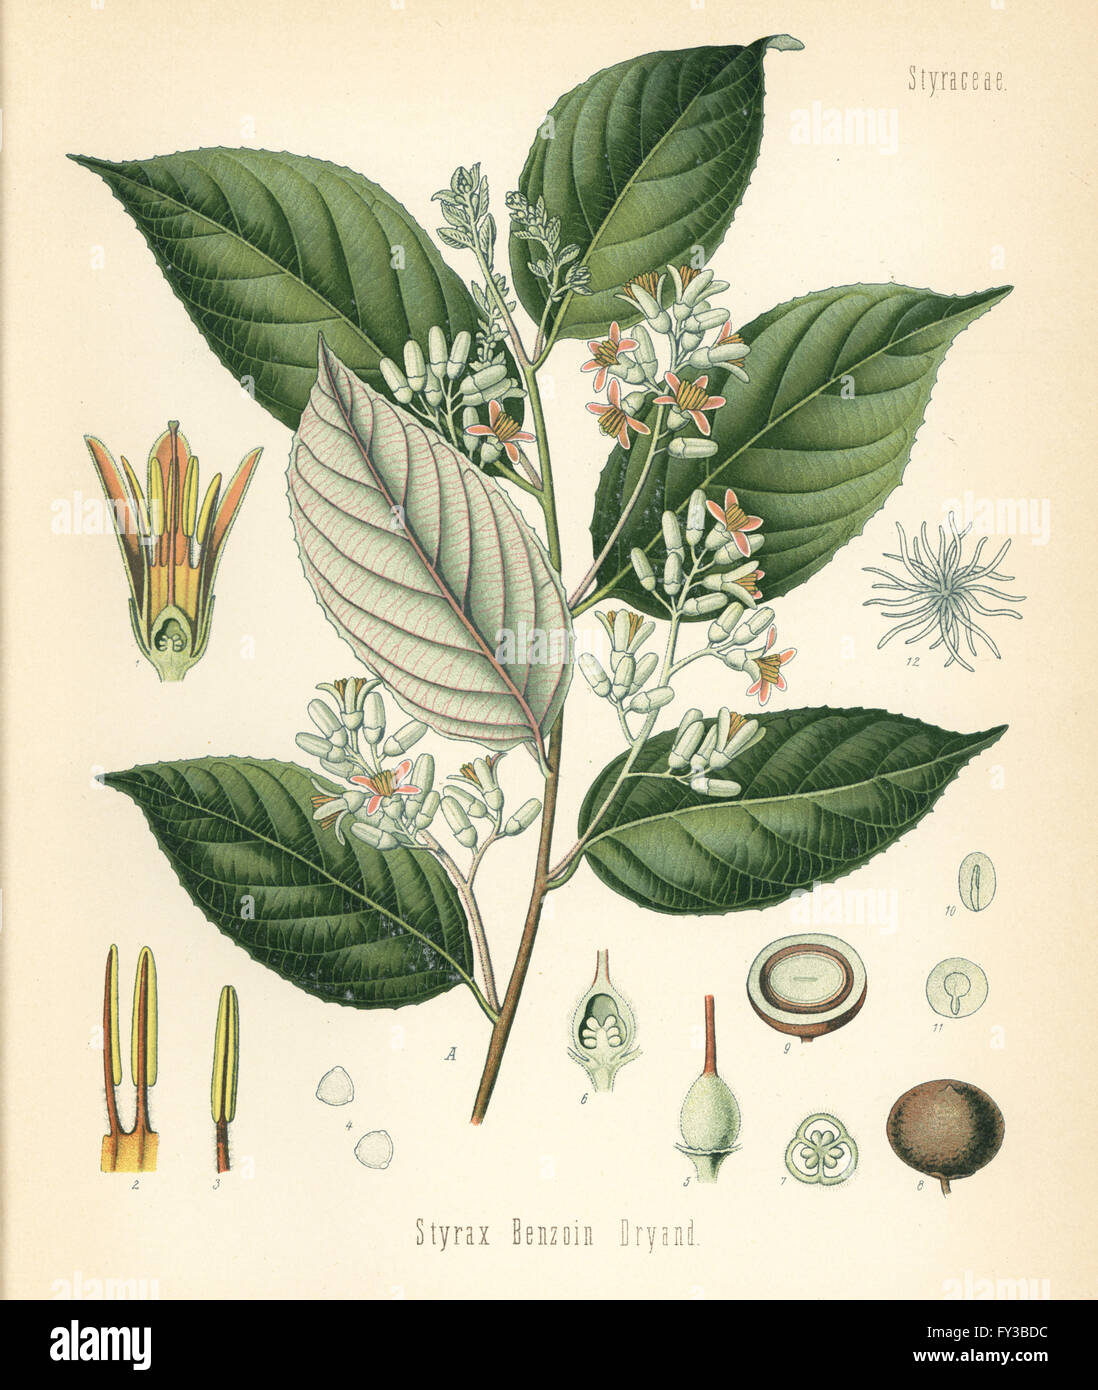 Benzoin tree, Styrax benzoin. Chromolithograph after a botanical illustration from Hermann Adolph Koehler's Medicinal Plants, edited by Gustav Pabst, Koehler, Germany, 1887. Stock Photo